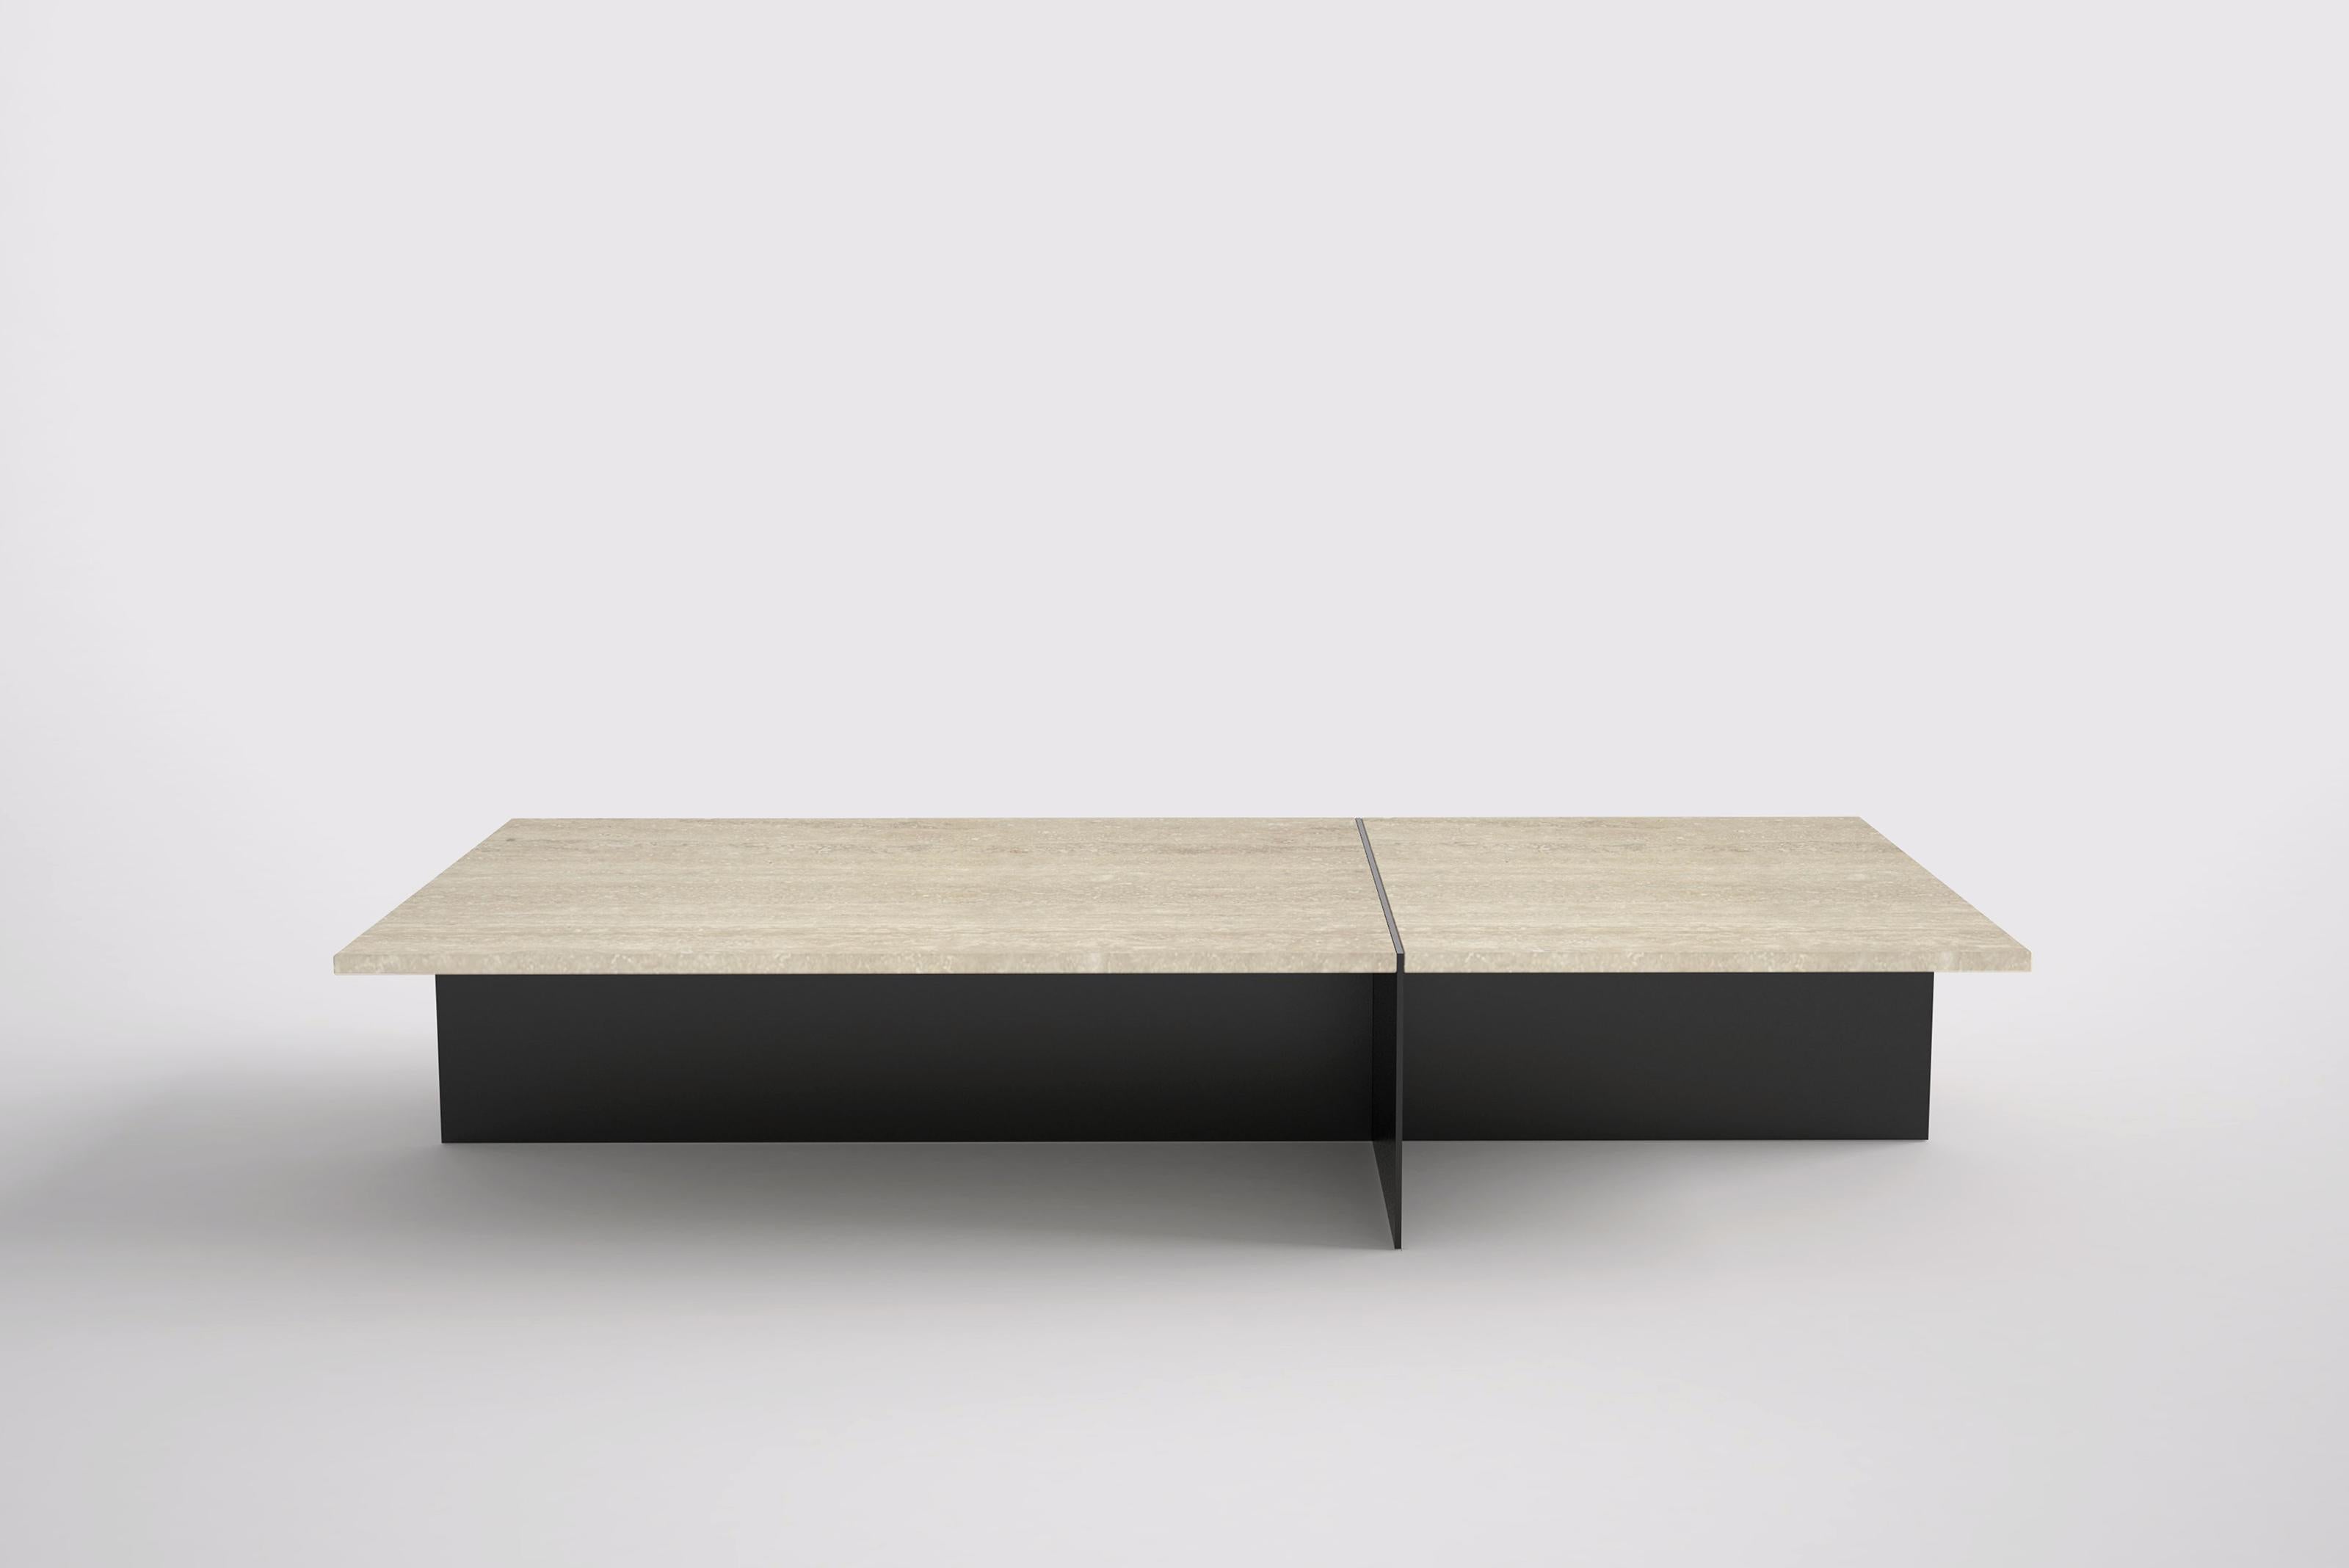 Division Rectangular Coffee Table by Phase Design
Dimensions: D 81,3 x W 162,6 x H 30,5 cm. 
Materials: Powder-coated solid steel and travertine.

Solid steel sheet available in a flat black or white powder coat finish. Powder coat finishes are